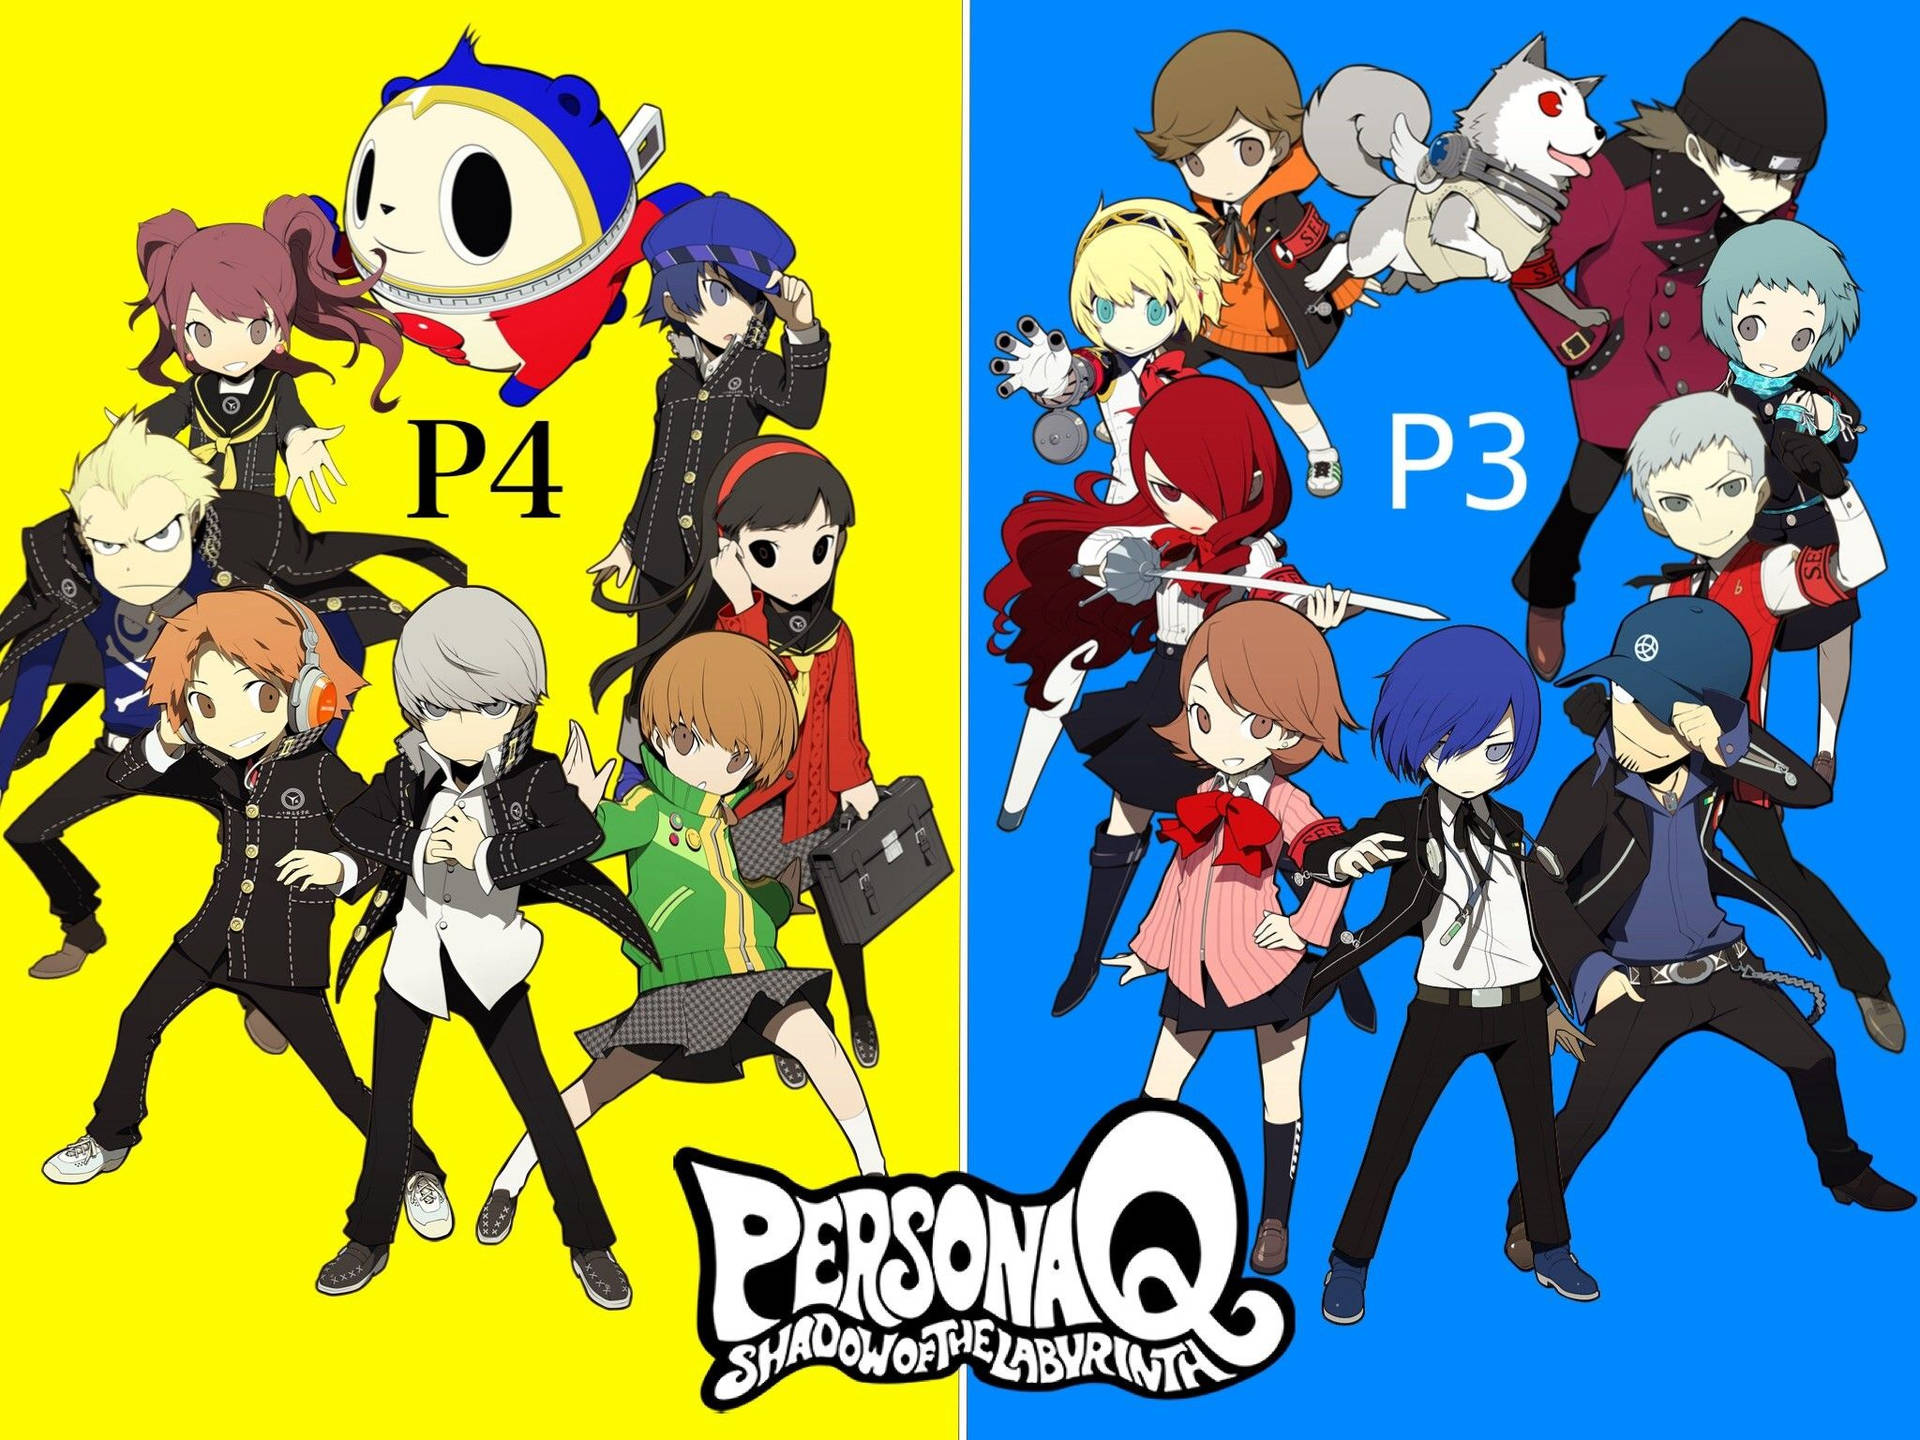 Join Catherine & Rei on an Epic Adventure in Persona Q: Shadow of the Labyrinth Wallpaper